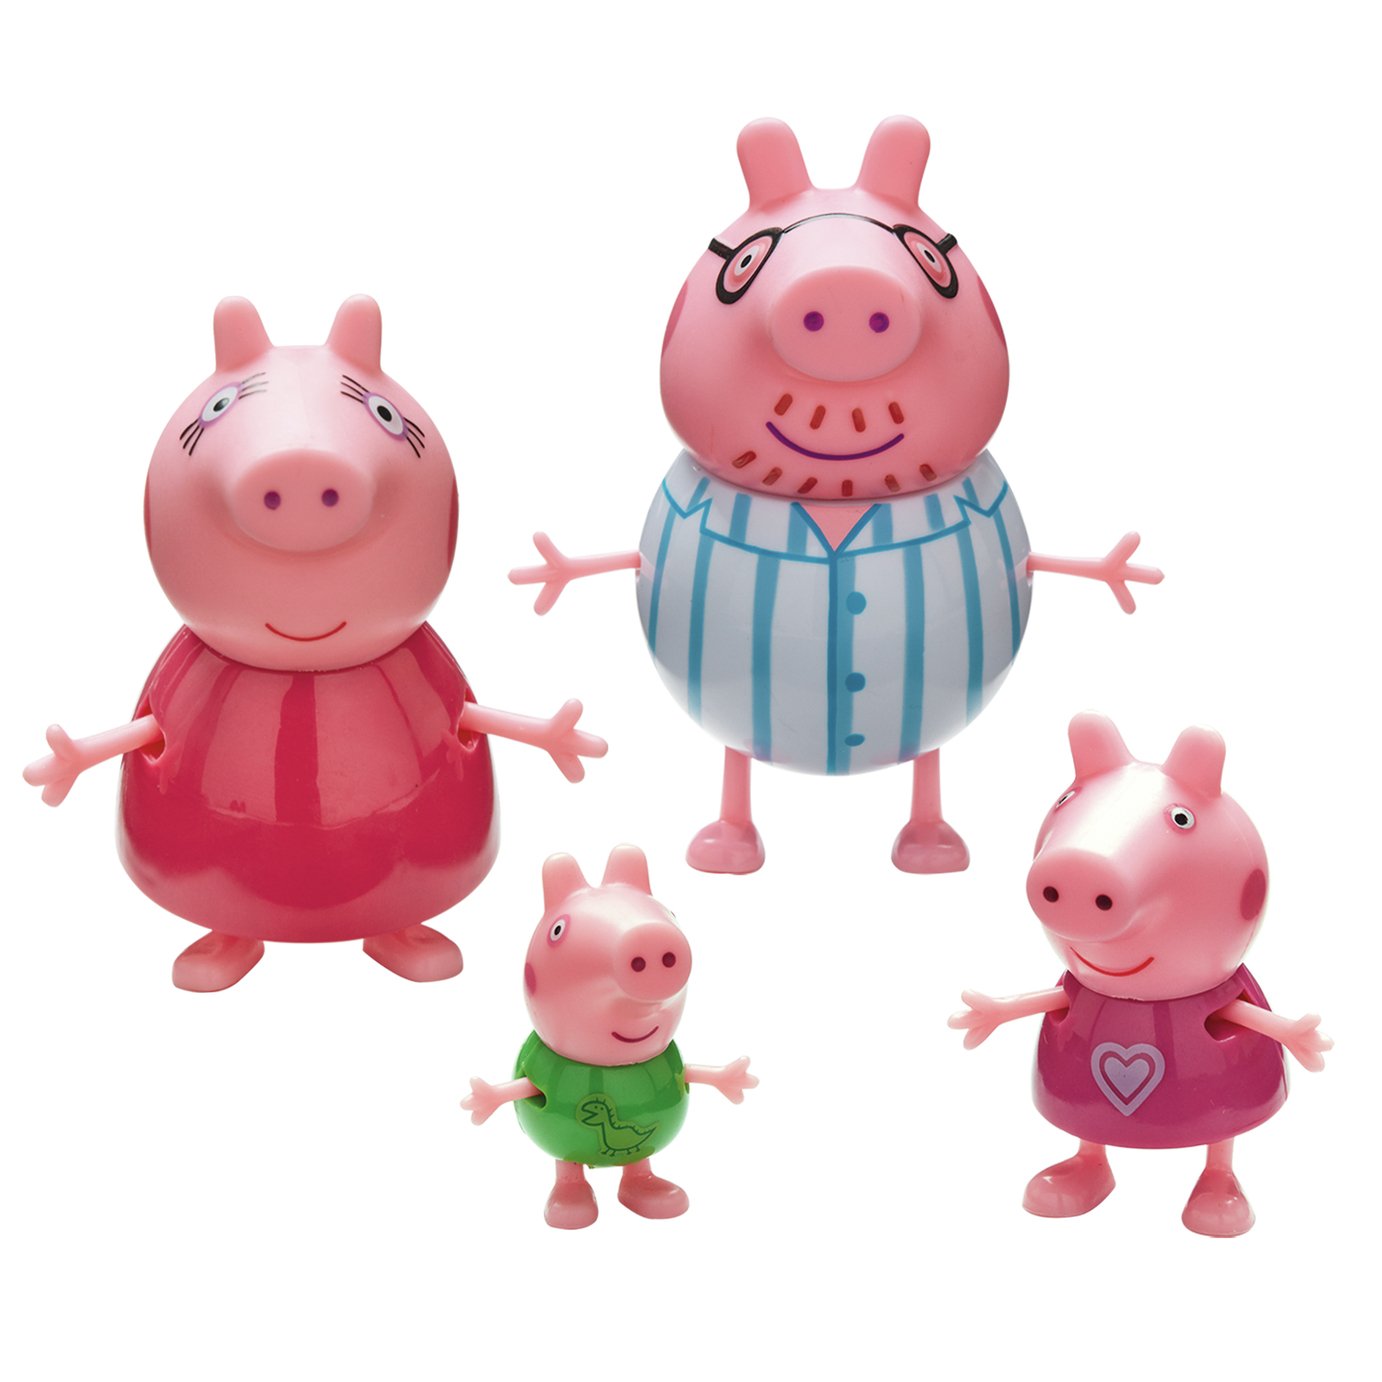 mummy and daddy pig figures